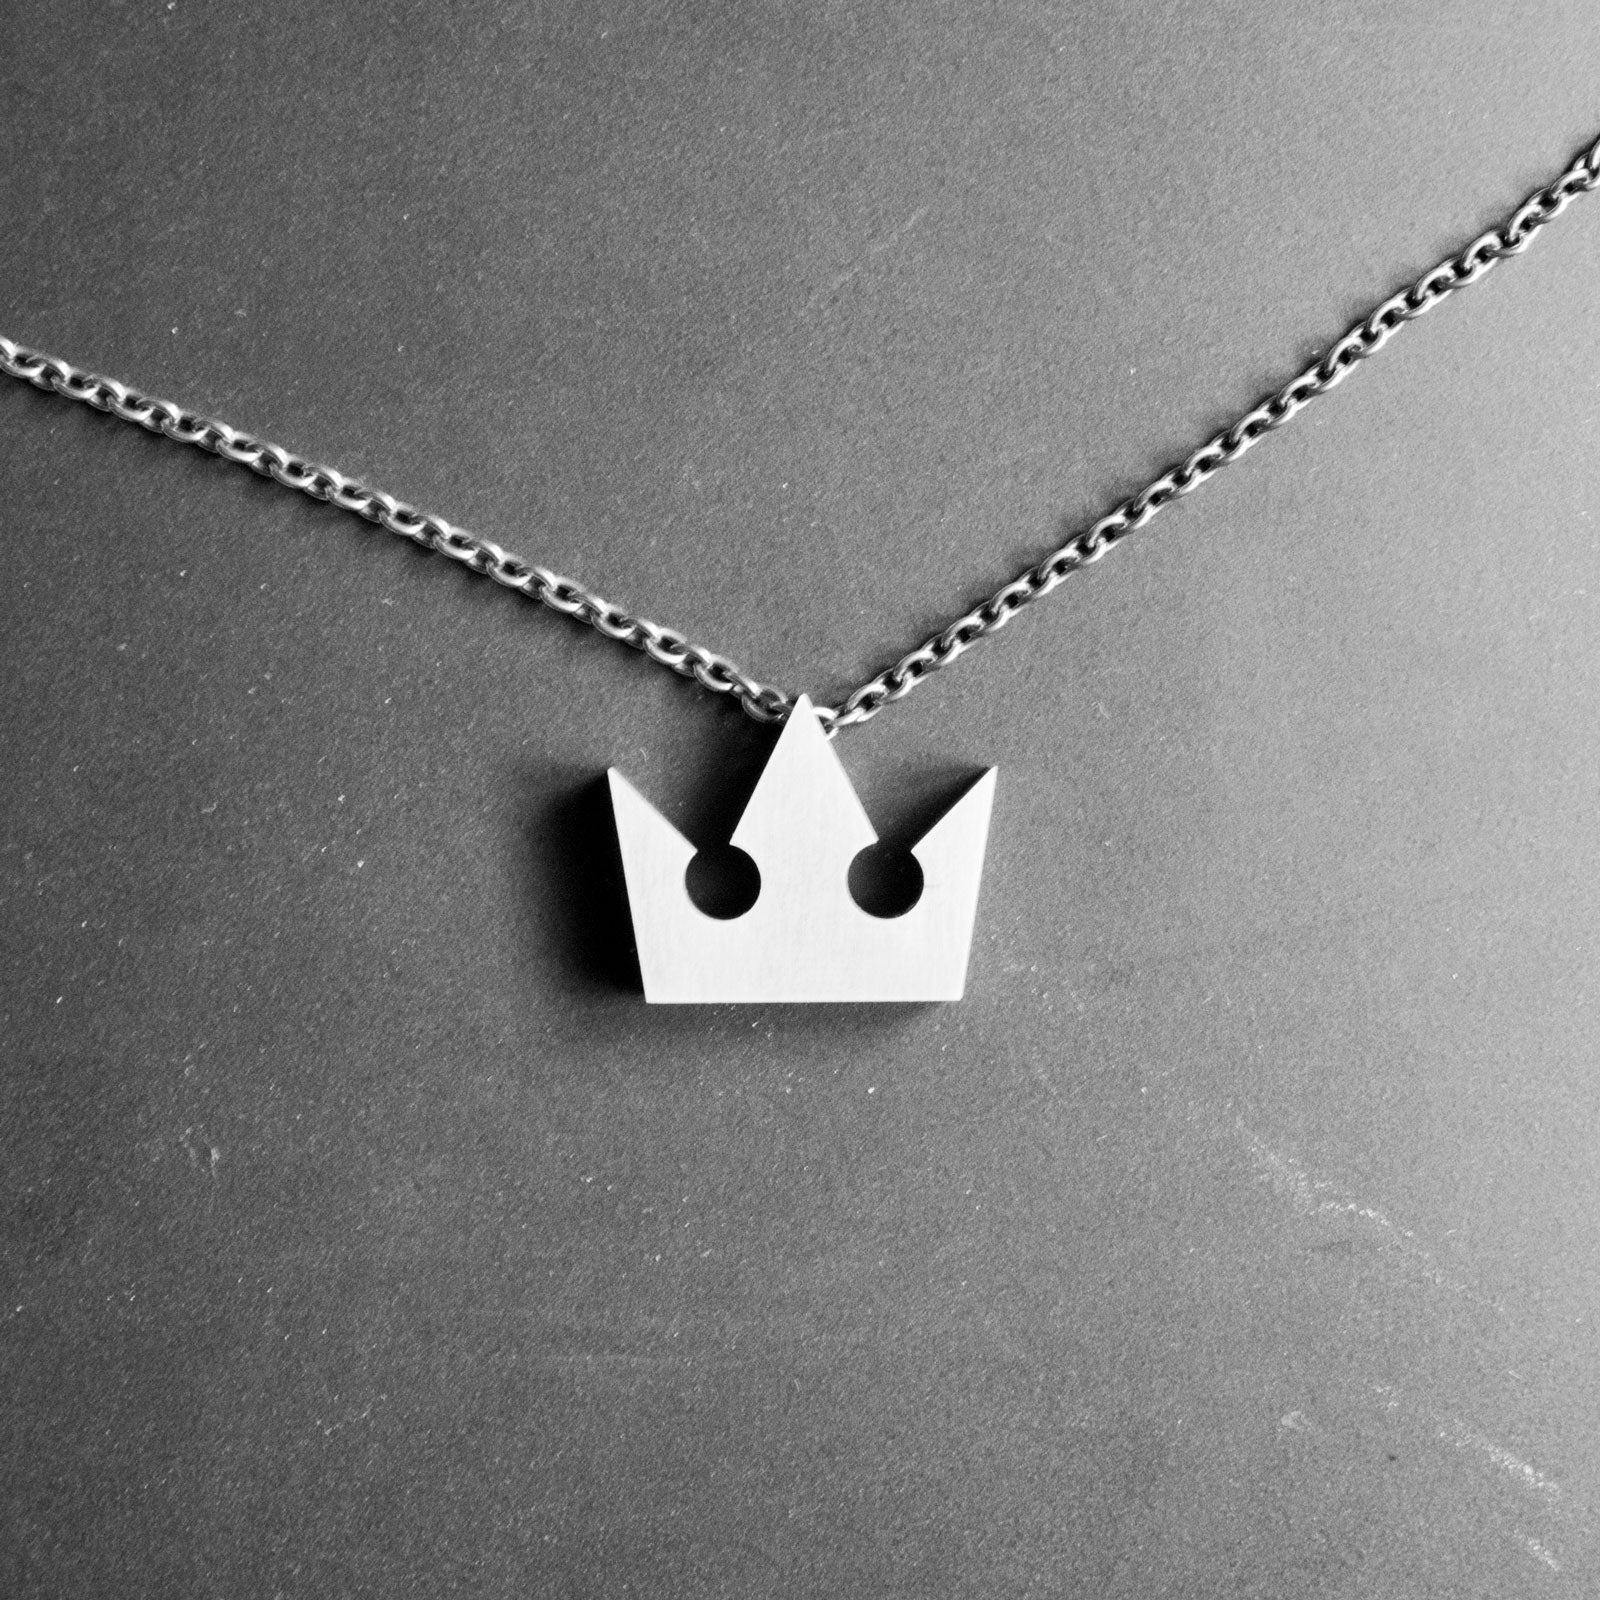 Sora's necklace, perfectly recreated with faithful proportions. Although it is immediately reminiscent of Sora, the crown is a seemingly simple, minimalist and a timeless piece to wear. Entirely handcrafted from grade 5 titanium.